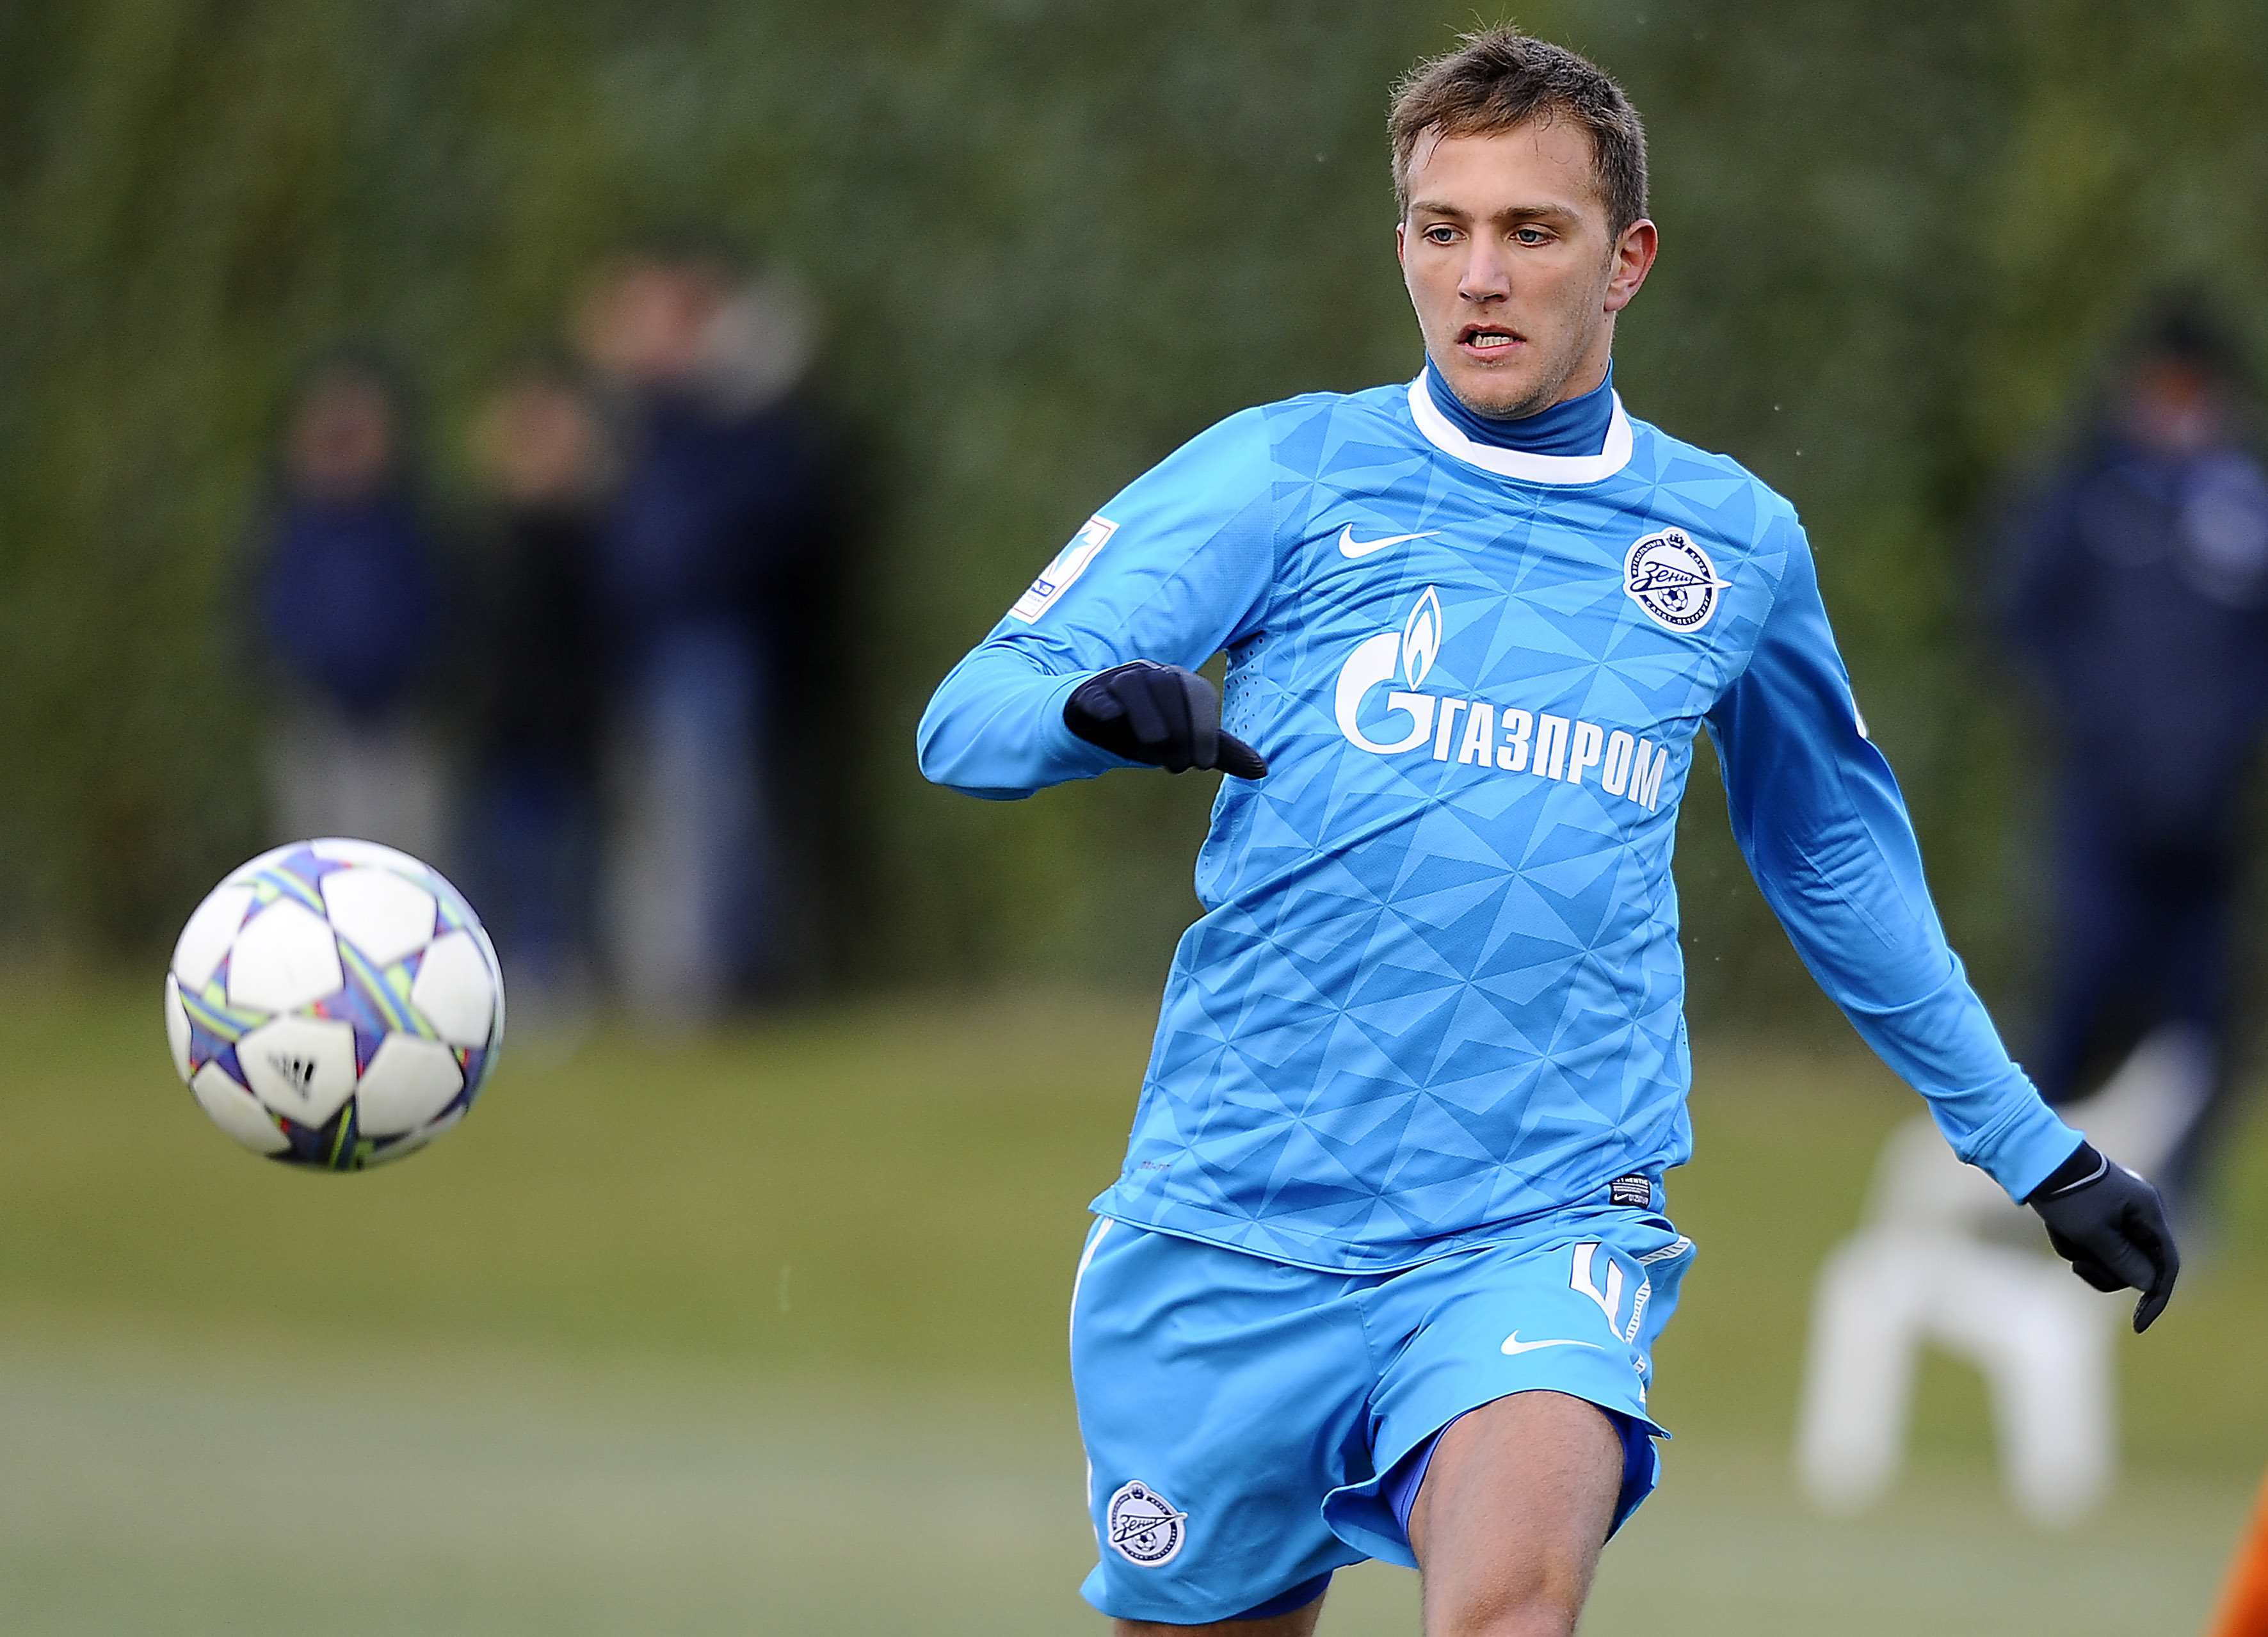 Agent of Criscito: “Inter? They are interested, but…”